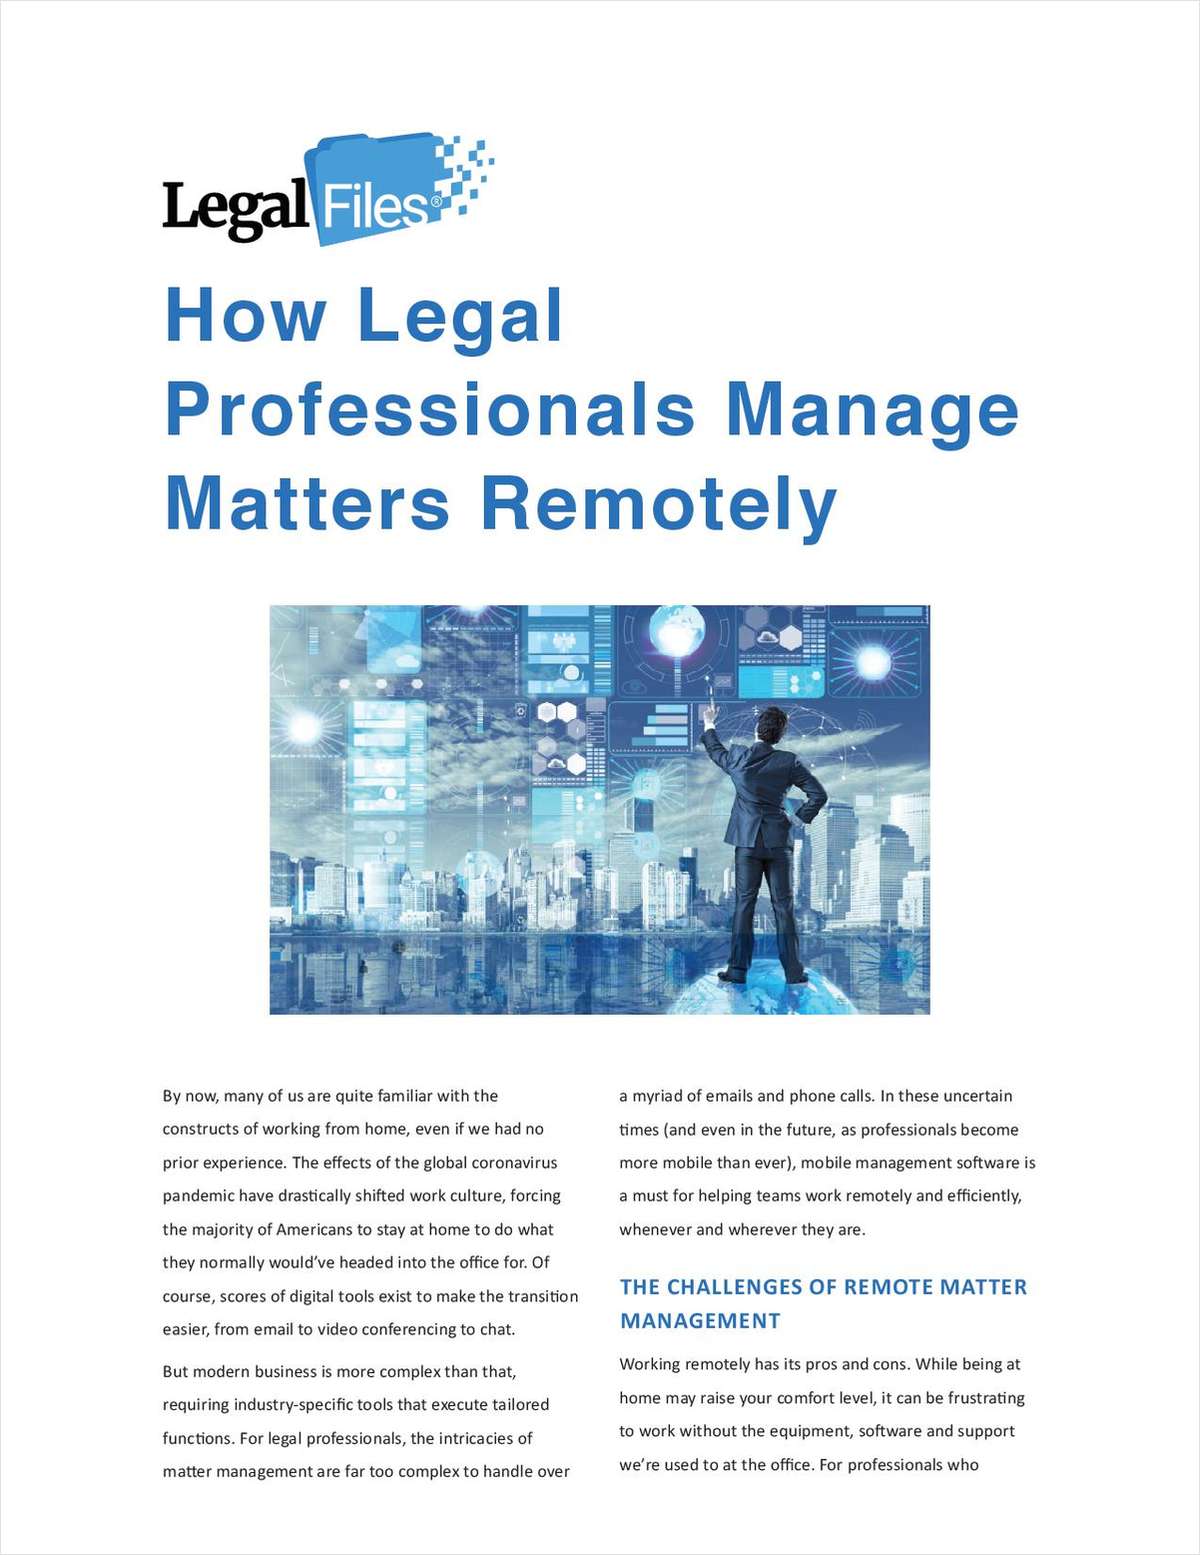 How Legal Professionals Manage Matters Remotely